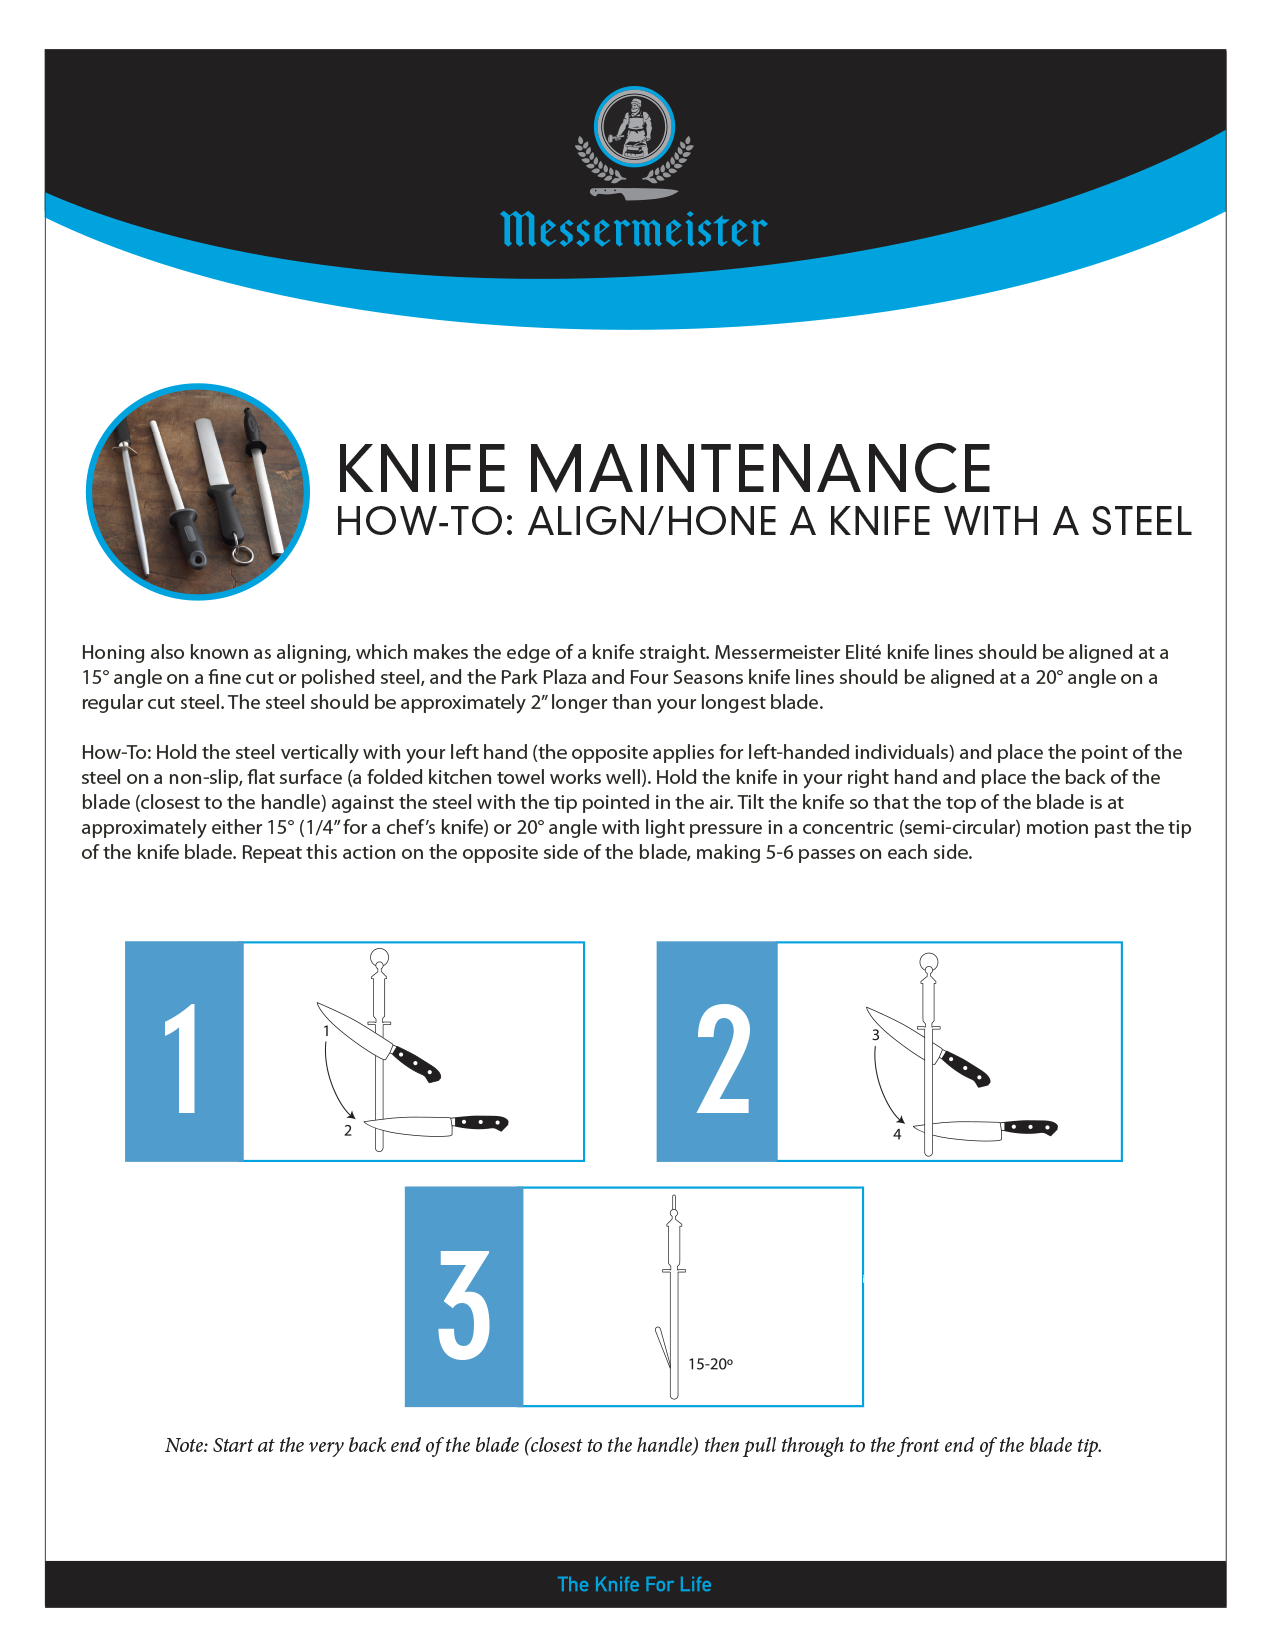 How to Sharpen a Knife: Maintenance Guide